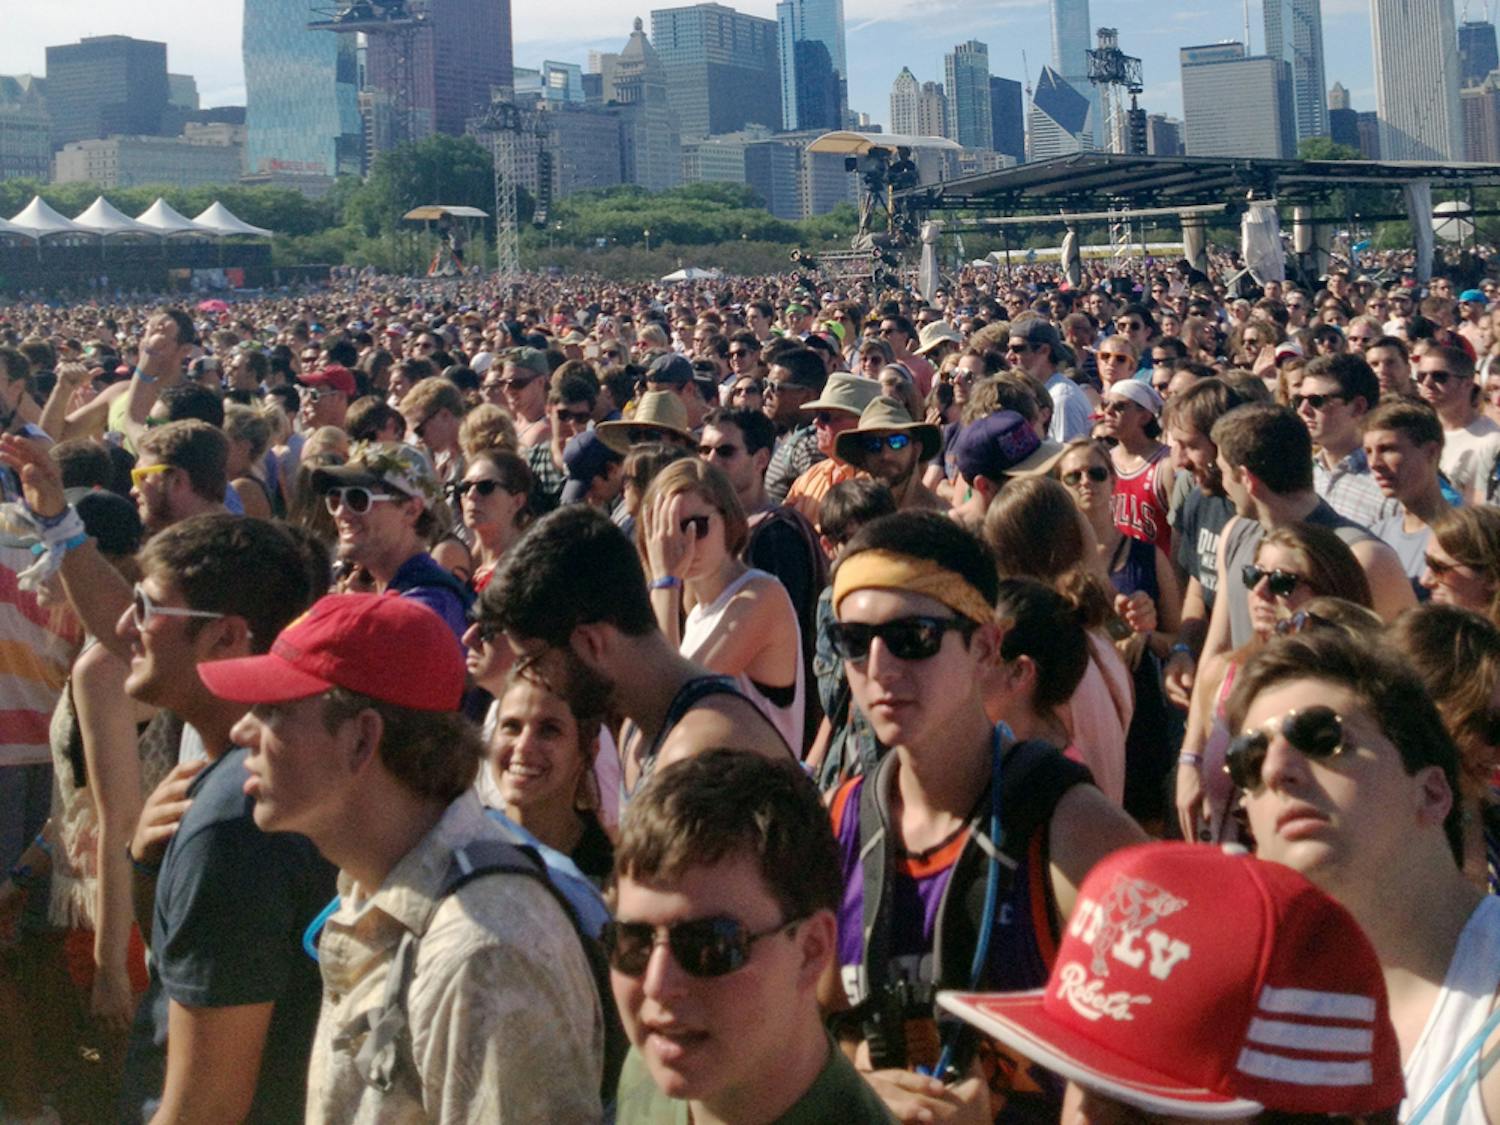 A crowd of Lollapalooza festival-goers wait for the next act to grace the stage in Grant Park in Chicago. The three-day festival will be held Aug. 1 to 3.